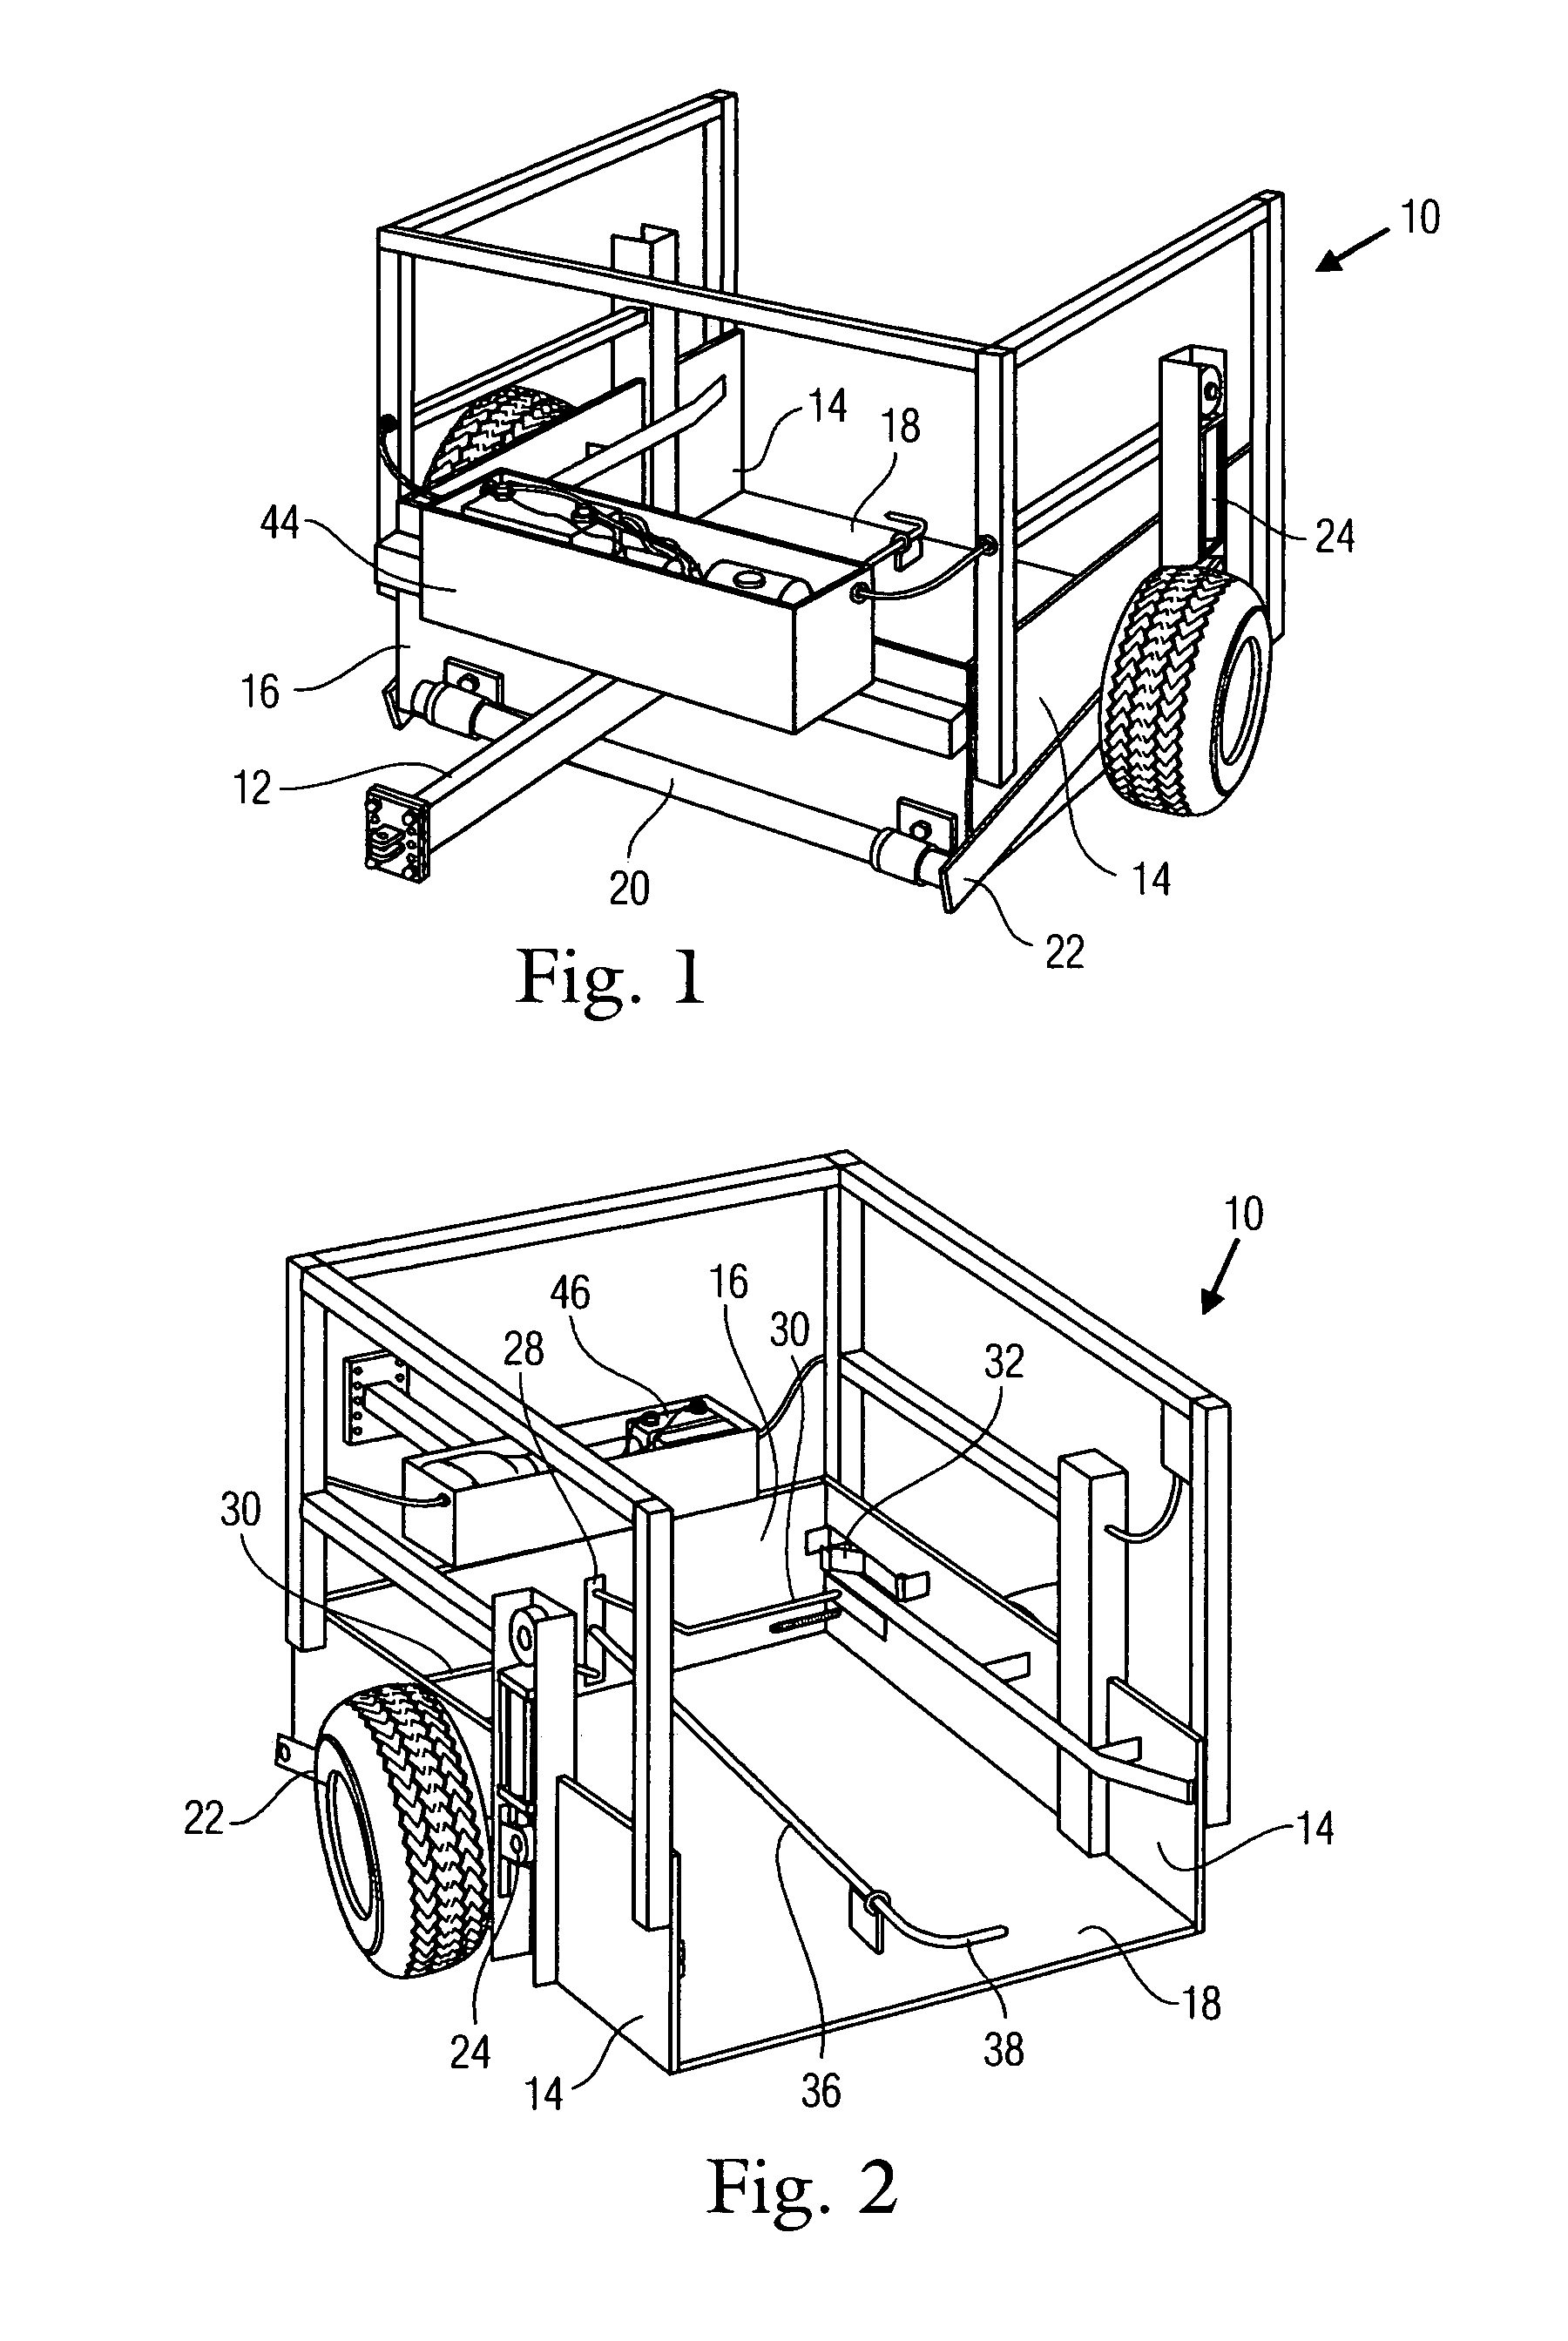 Apparatus and method for efficiently loading and unloading racks of potted plants in a wholesale nursery where the plants are growing